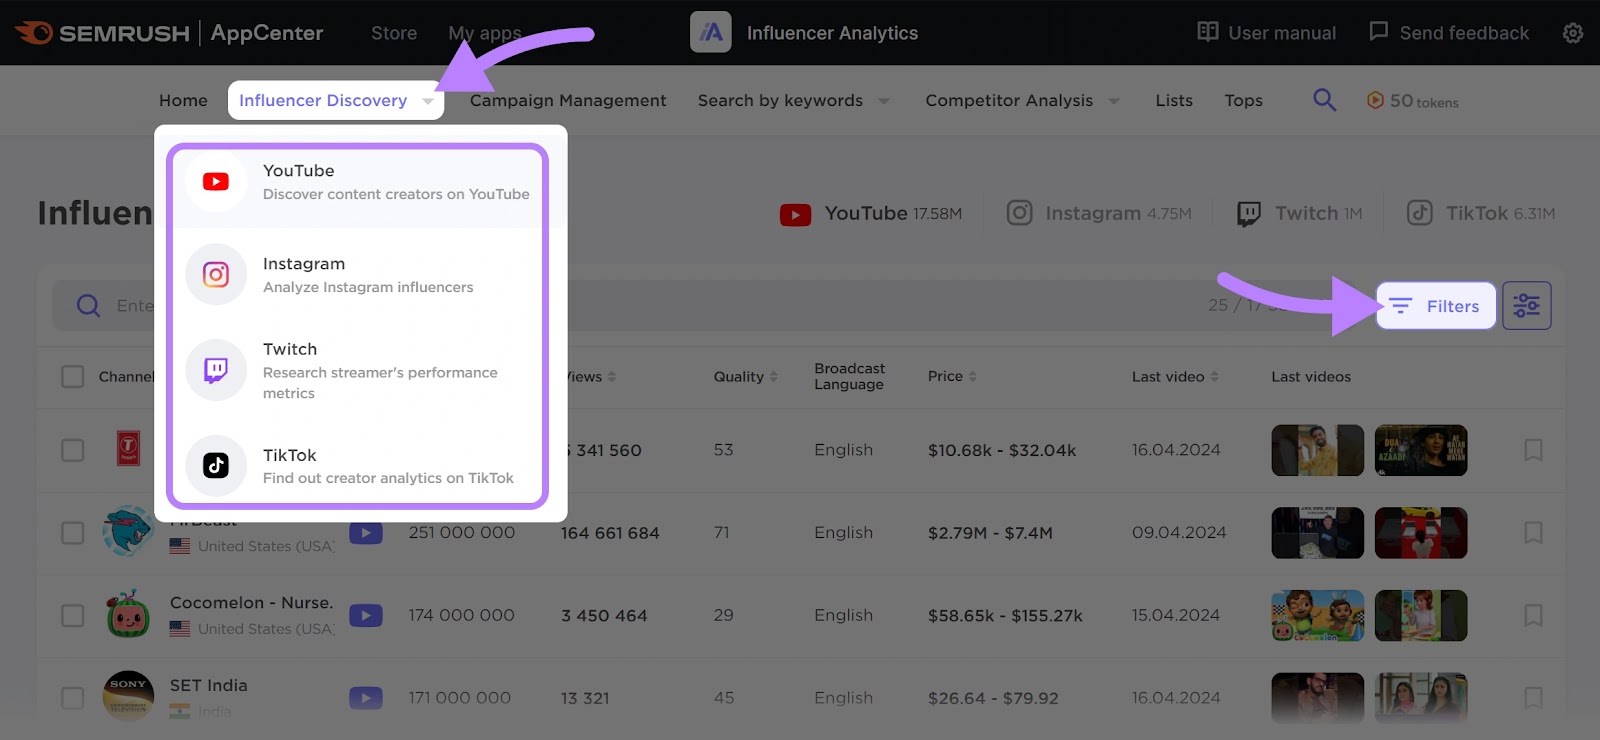 “Influencer Discovery” tab and "Filters" highlighted in the dashboard